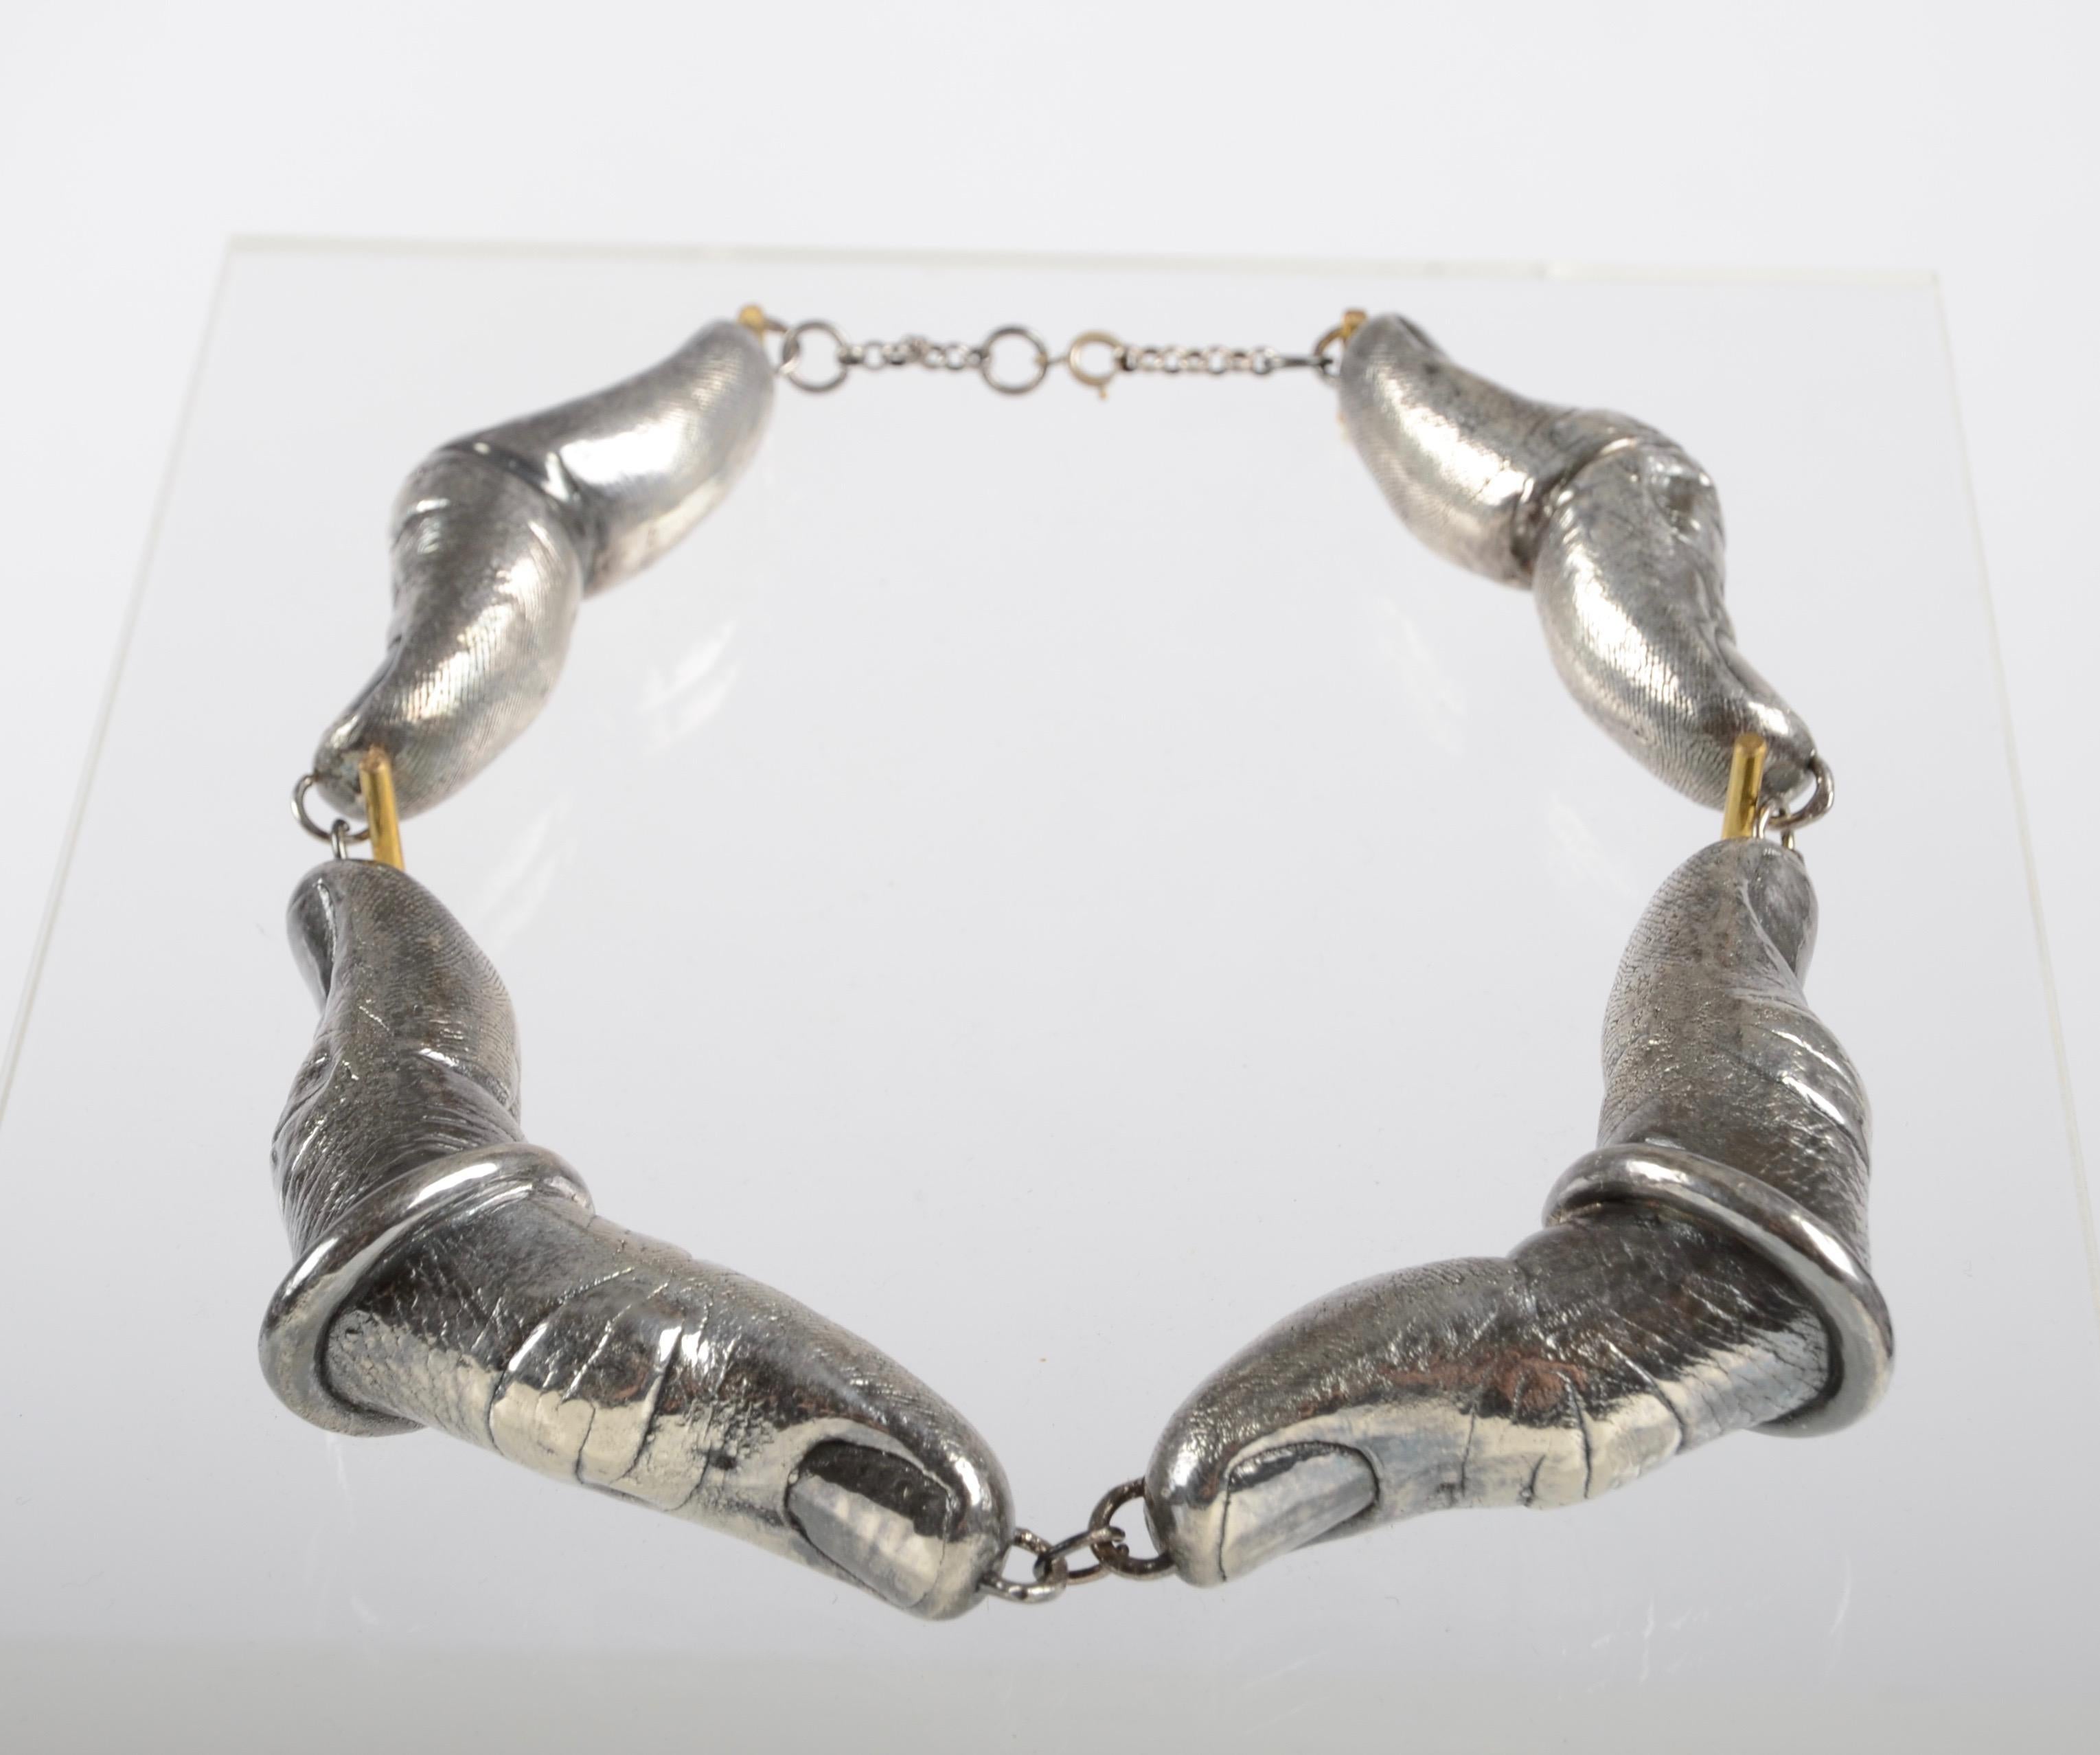 Unique necklet in silver, made in France, 1930s.

Apart of the exhibition “Essenzialmente la Mano”/ “Just the Hand”, seen in the catalogue edited by Alfonso Pluchinotta.